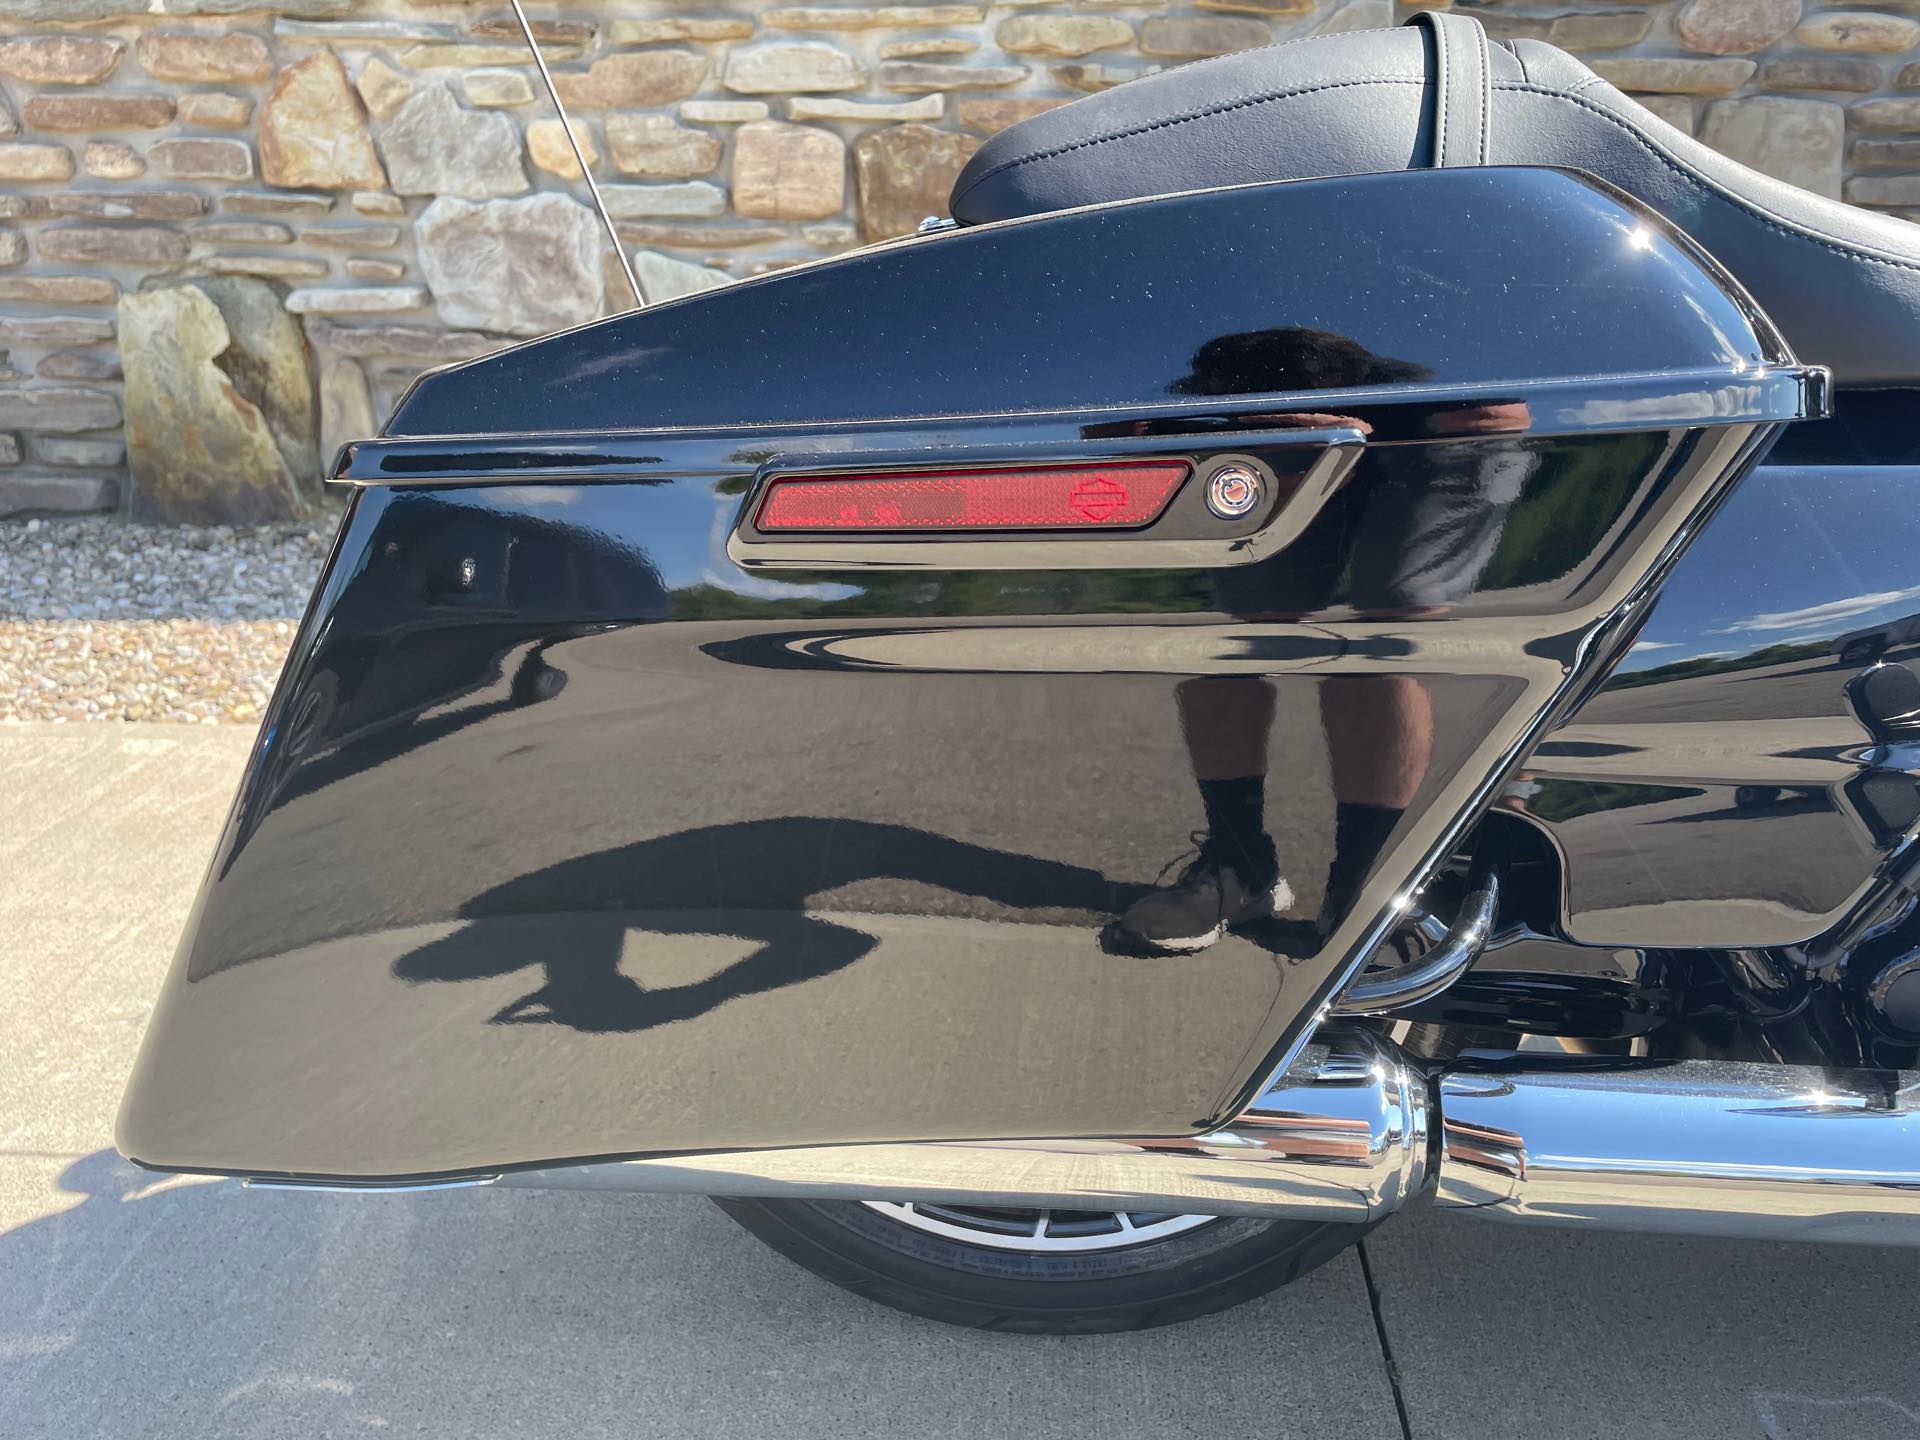 2022 Harley-Davidson Road Glide Special at Arkport Cycles